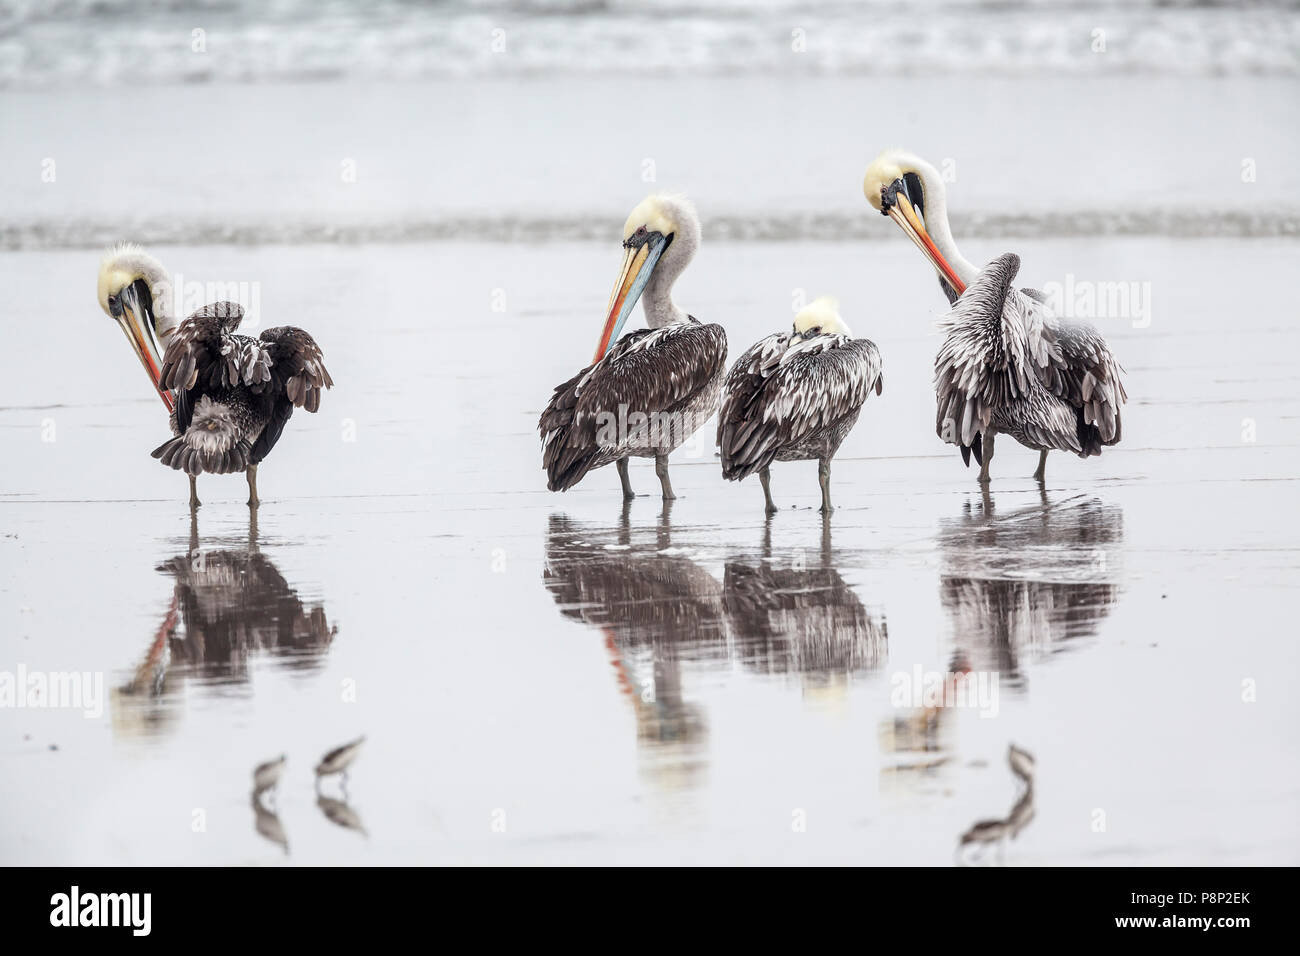 Group of four Peruvian Pelicans (Pelecanus thagus) standing on the beach grooming their feathers Stock Photo